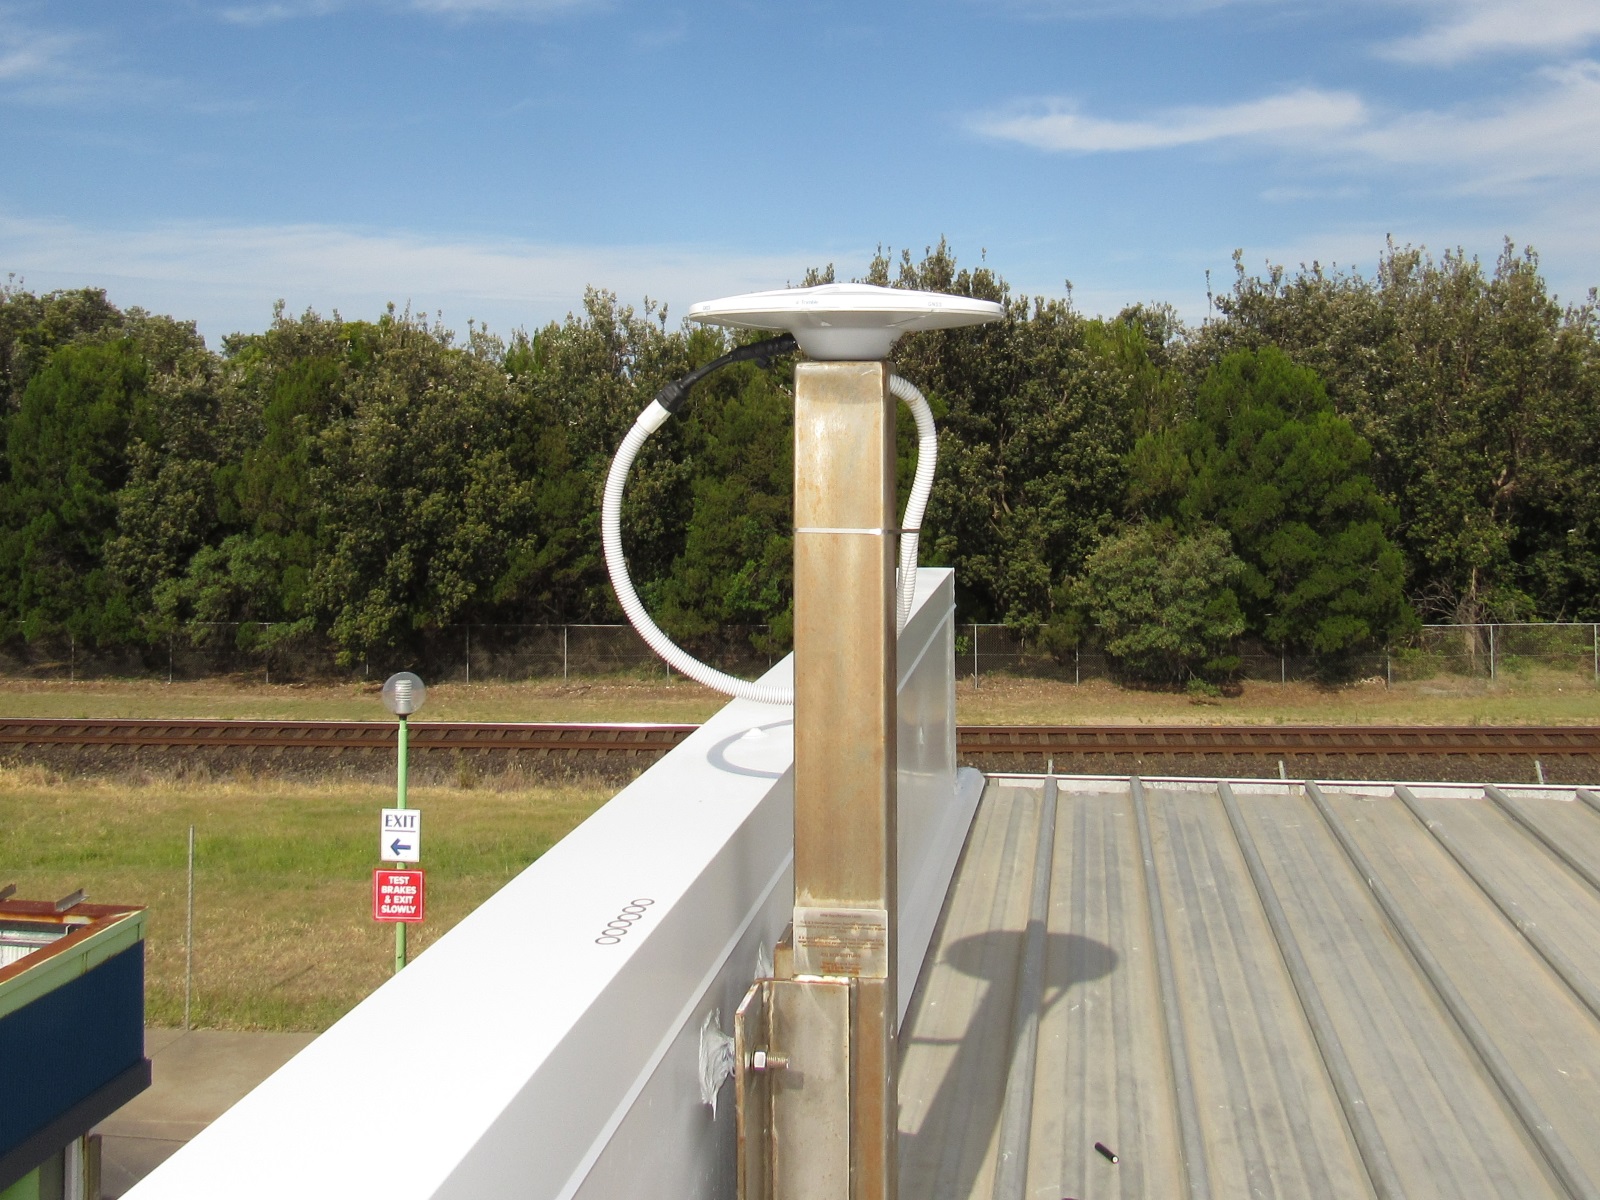 Image of CORS Antenna